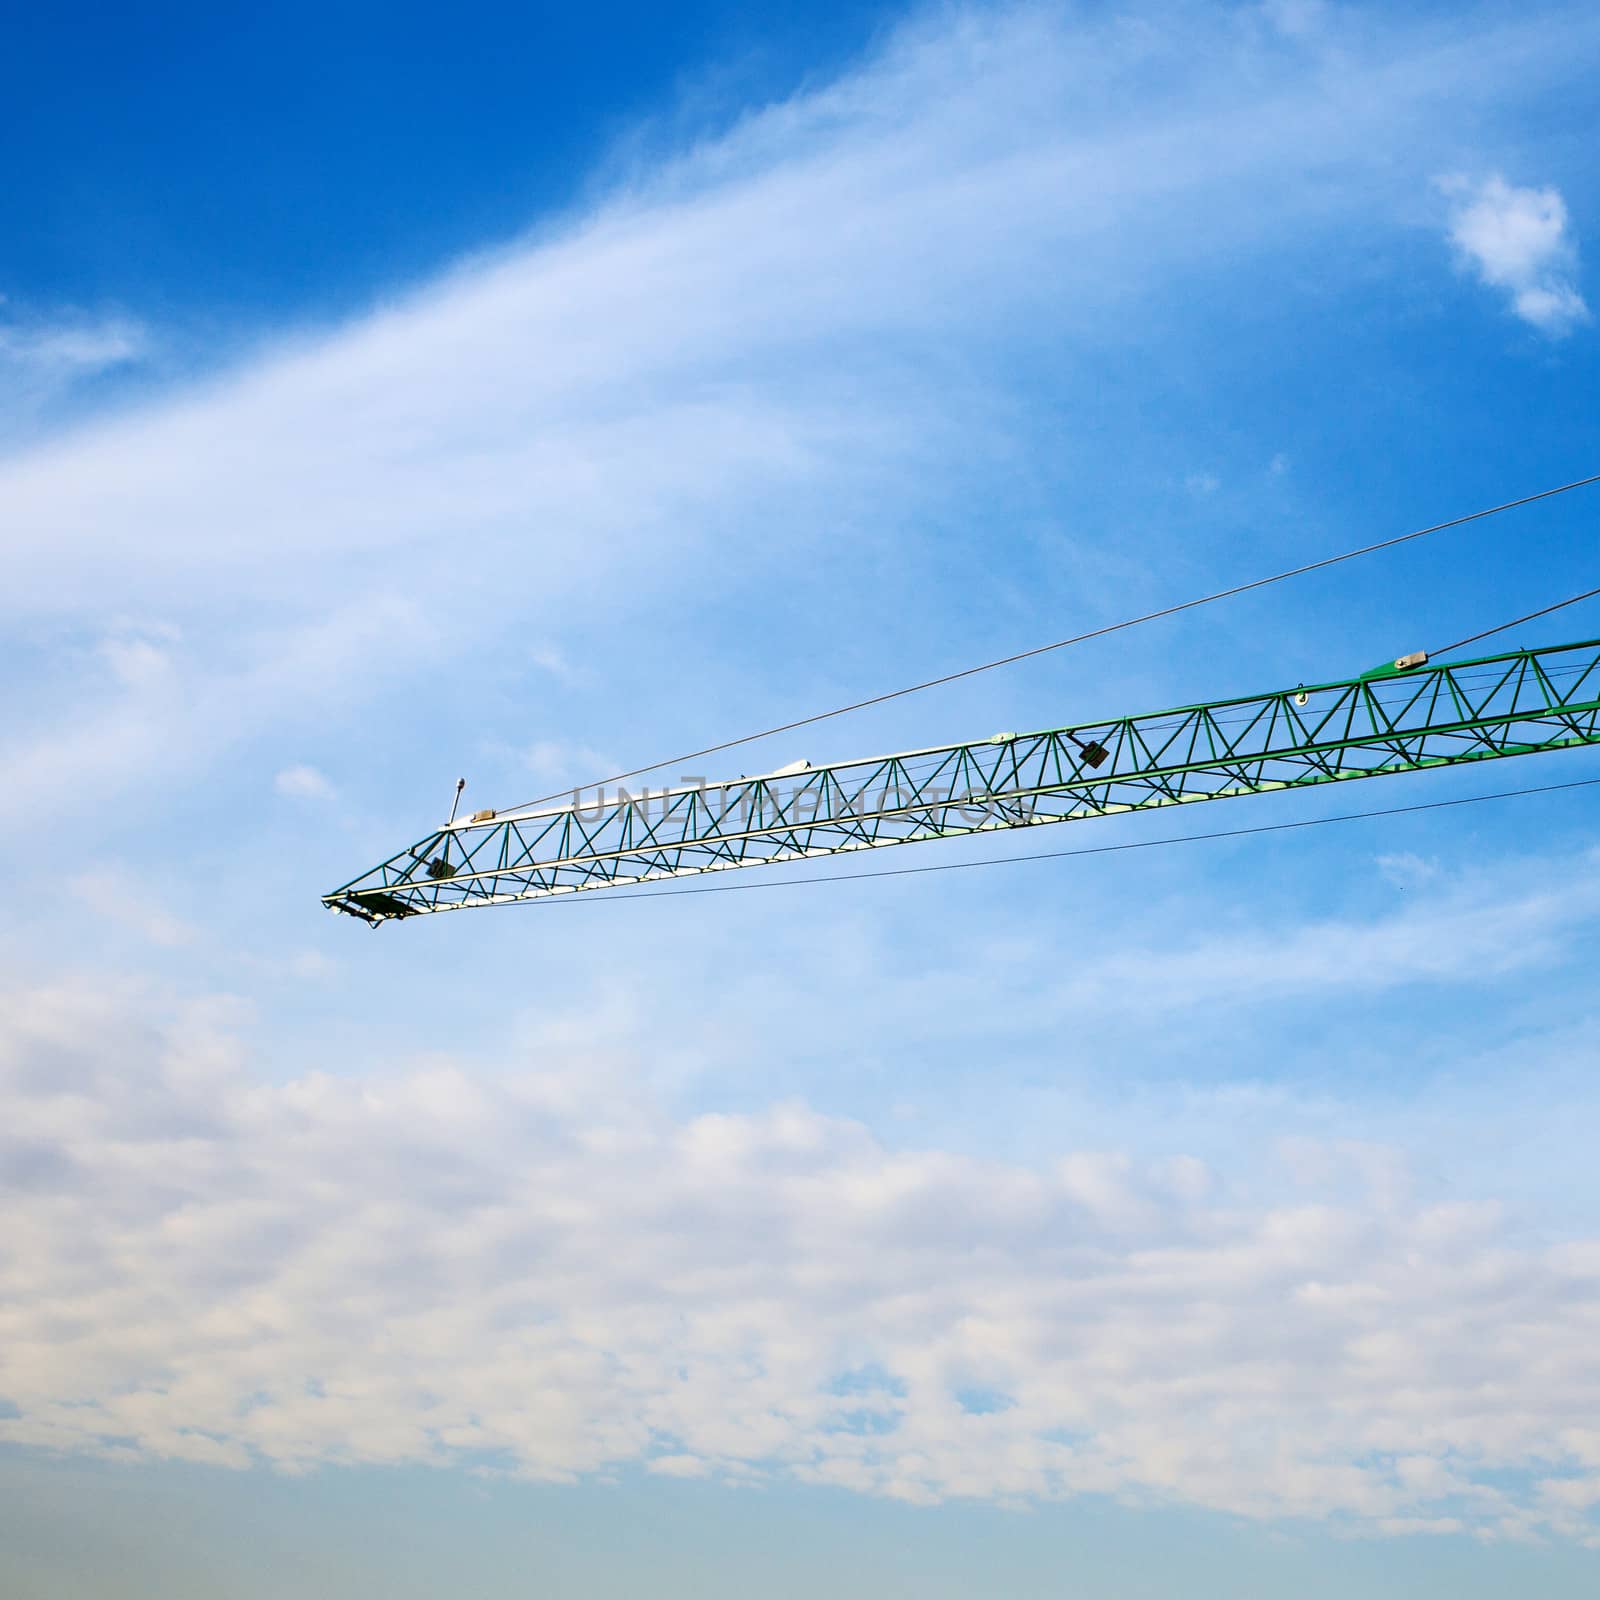 tower crane above the city on a background of blue sky by jannyjus